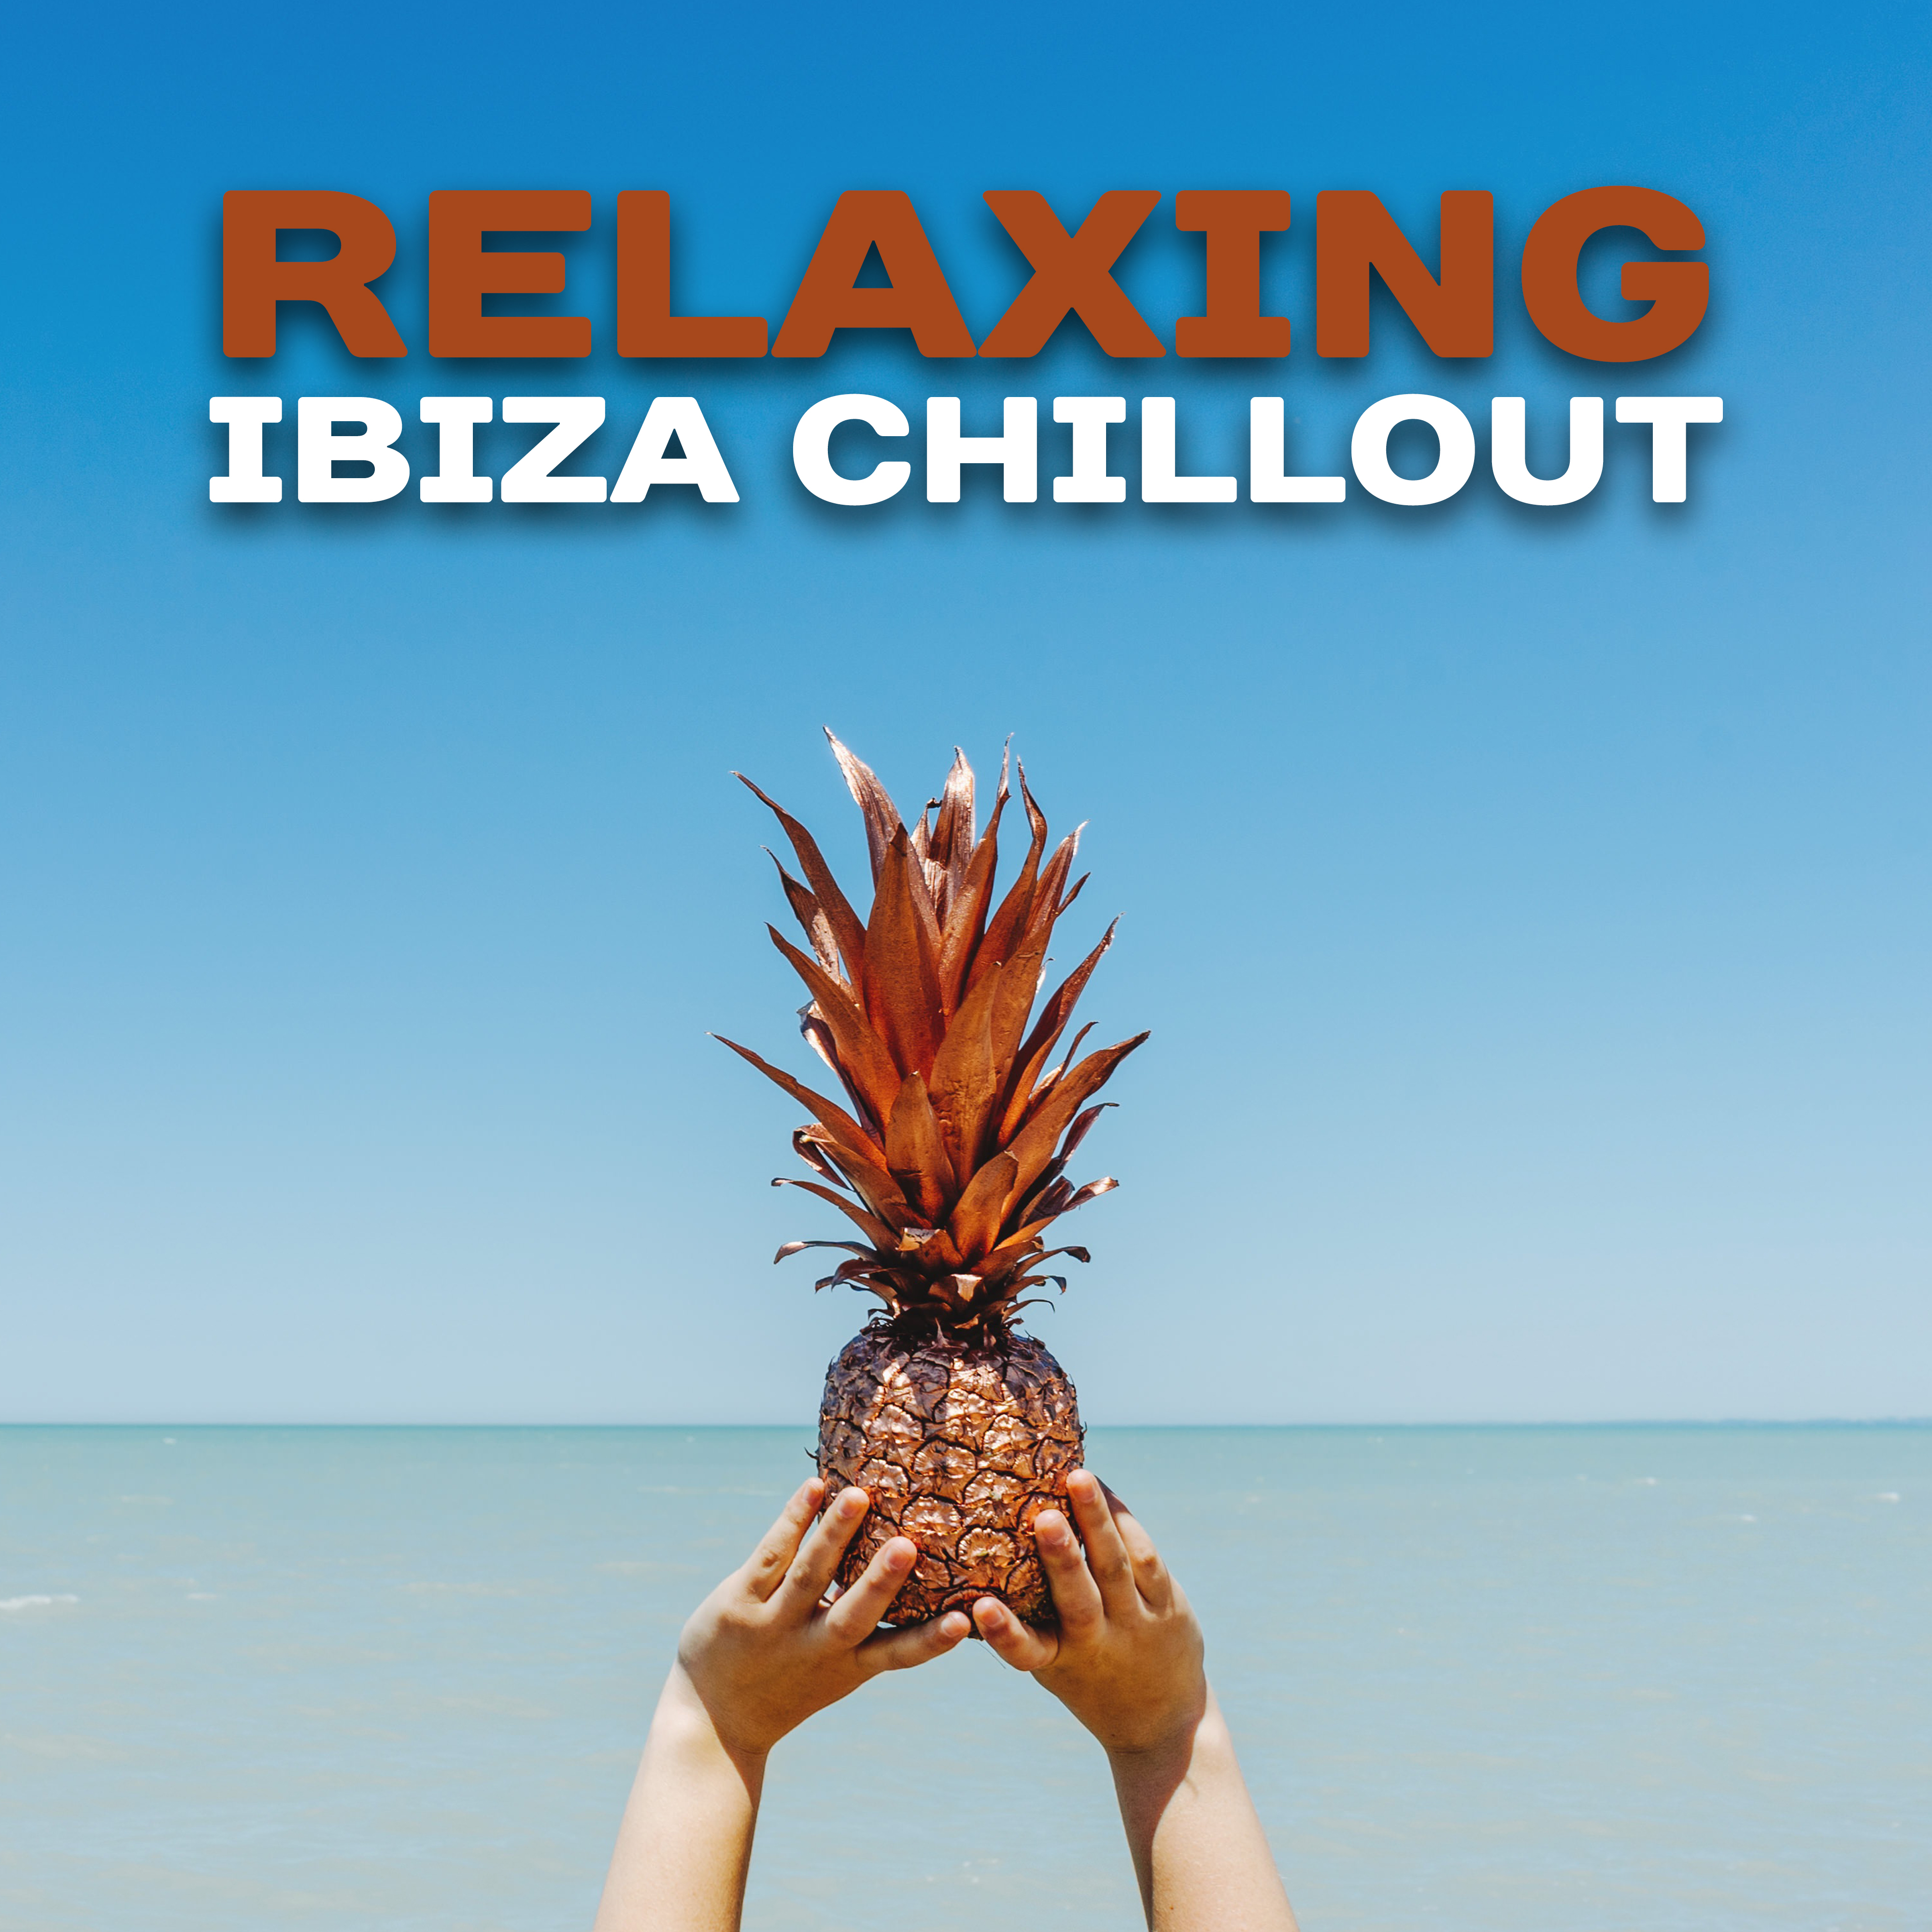 Relaxing Ibiza Chillout – Soft Chill Out Music, Ibiza Relaxation, Summer Rest, Beach Lounge